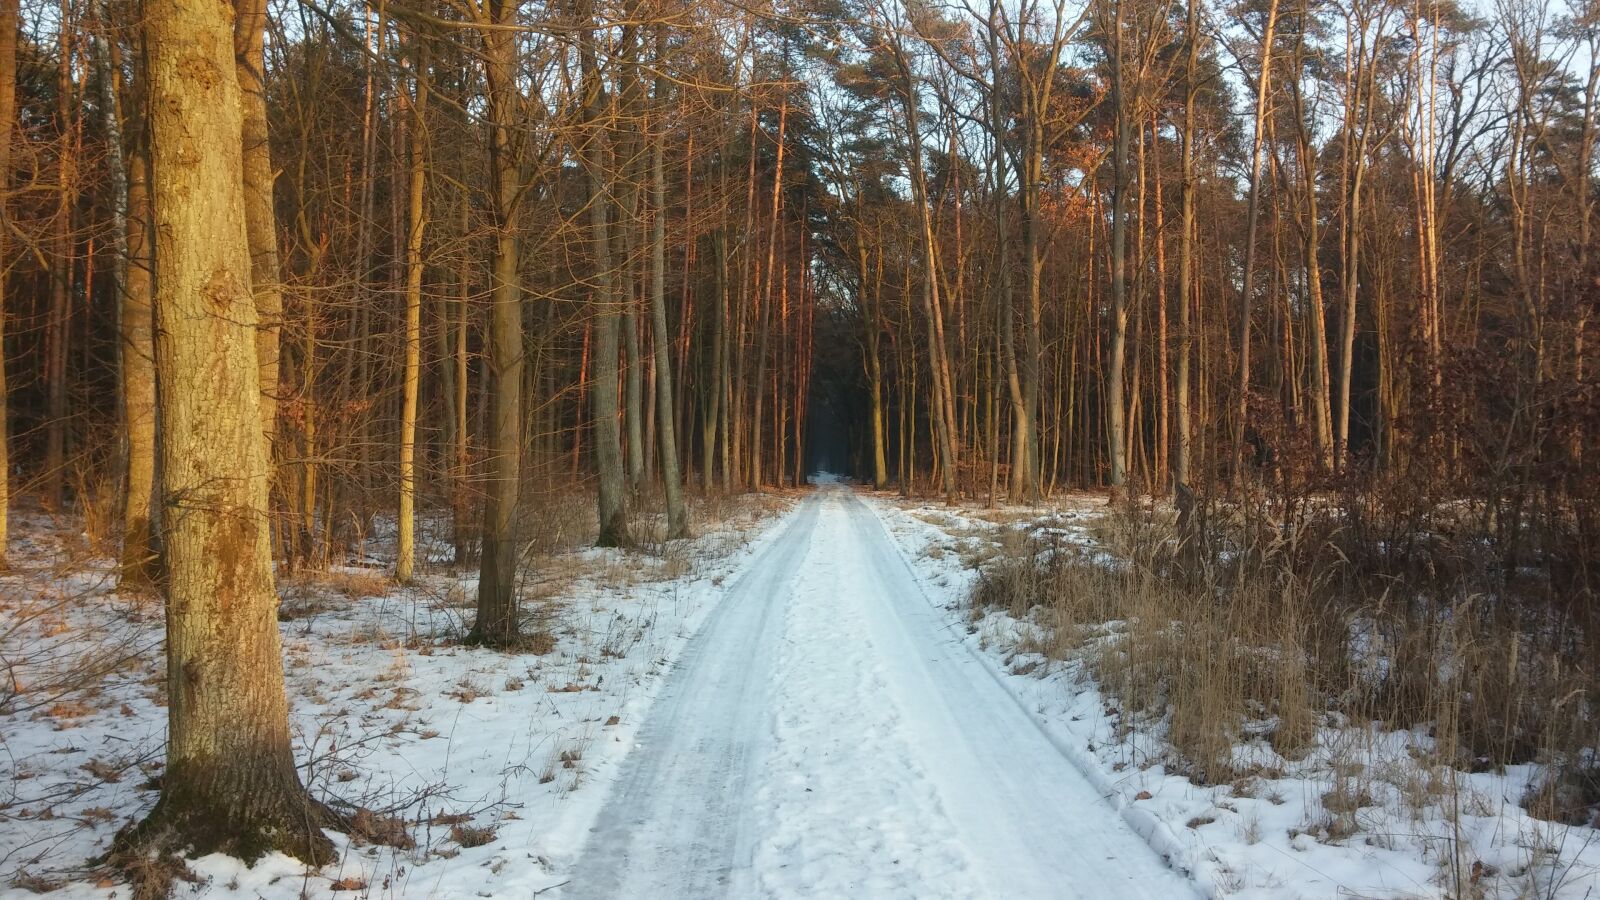 LG G2 sample photo. Forest, way, winter photography